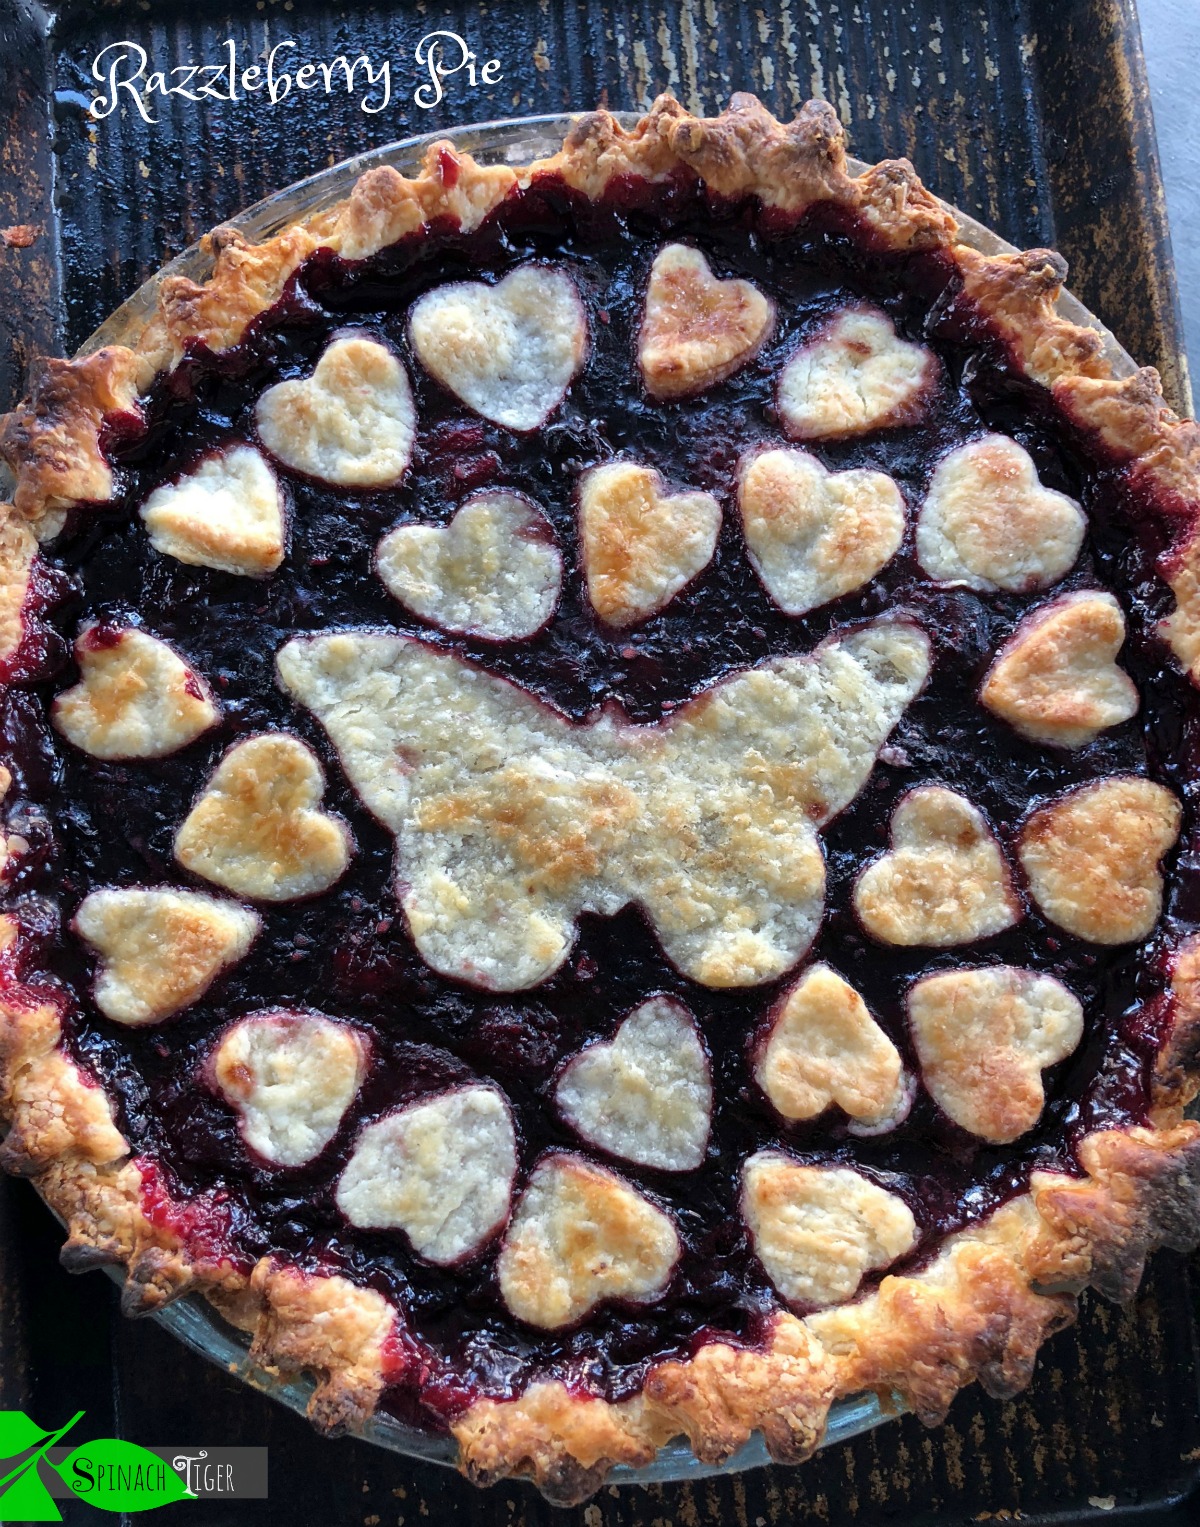 How to make Razzleberry Pie from Spinach Tiger